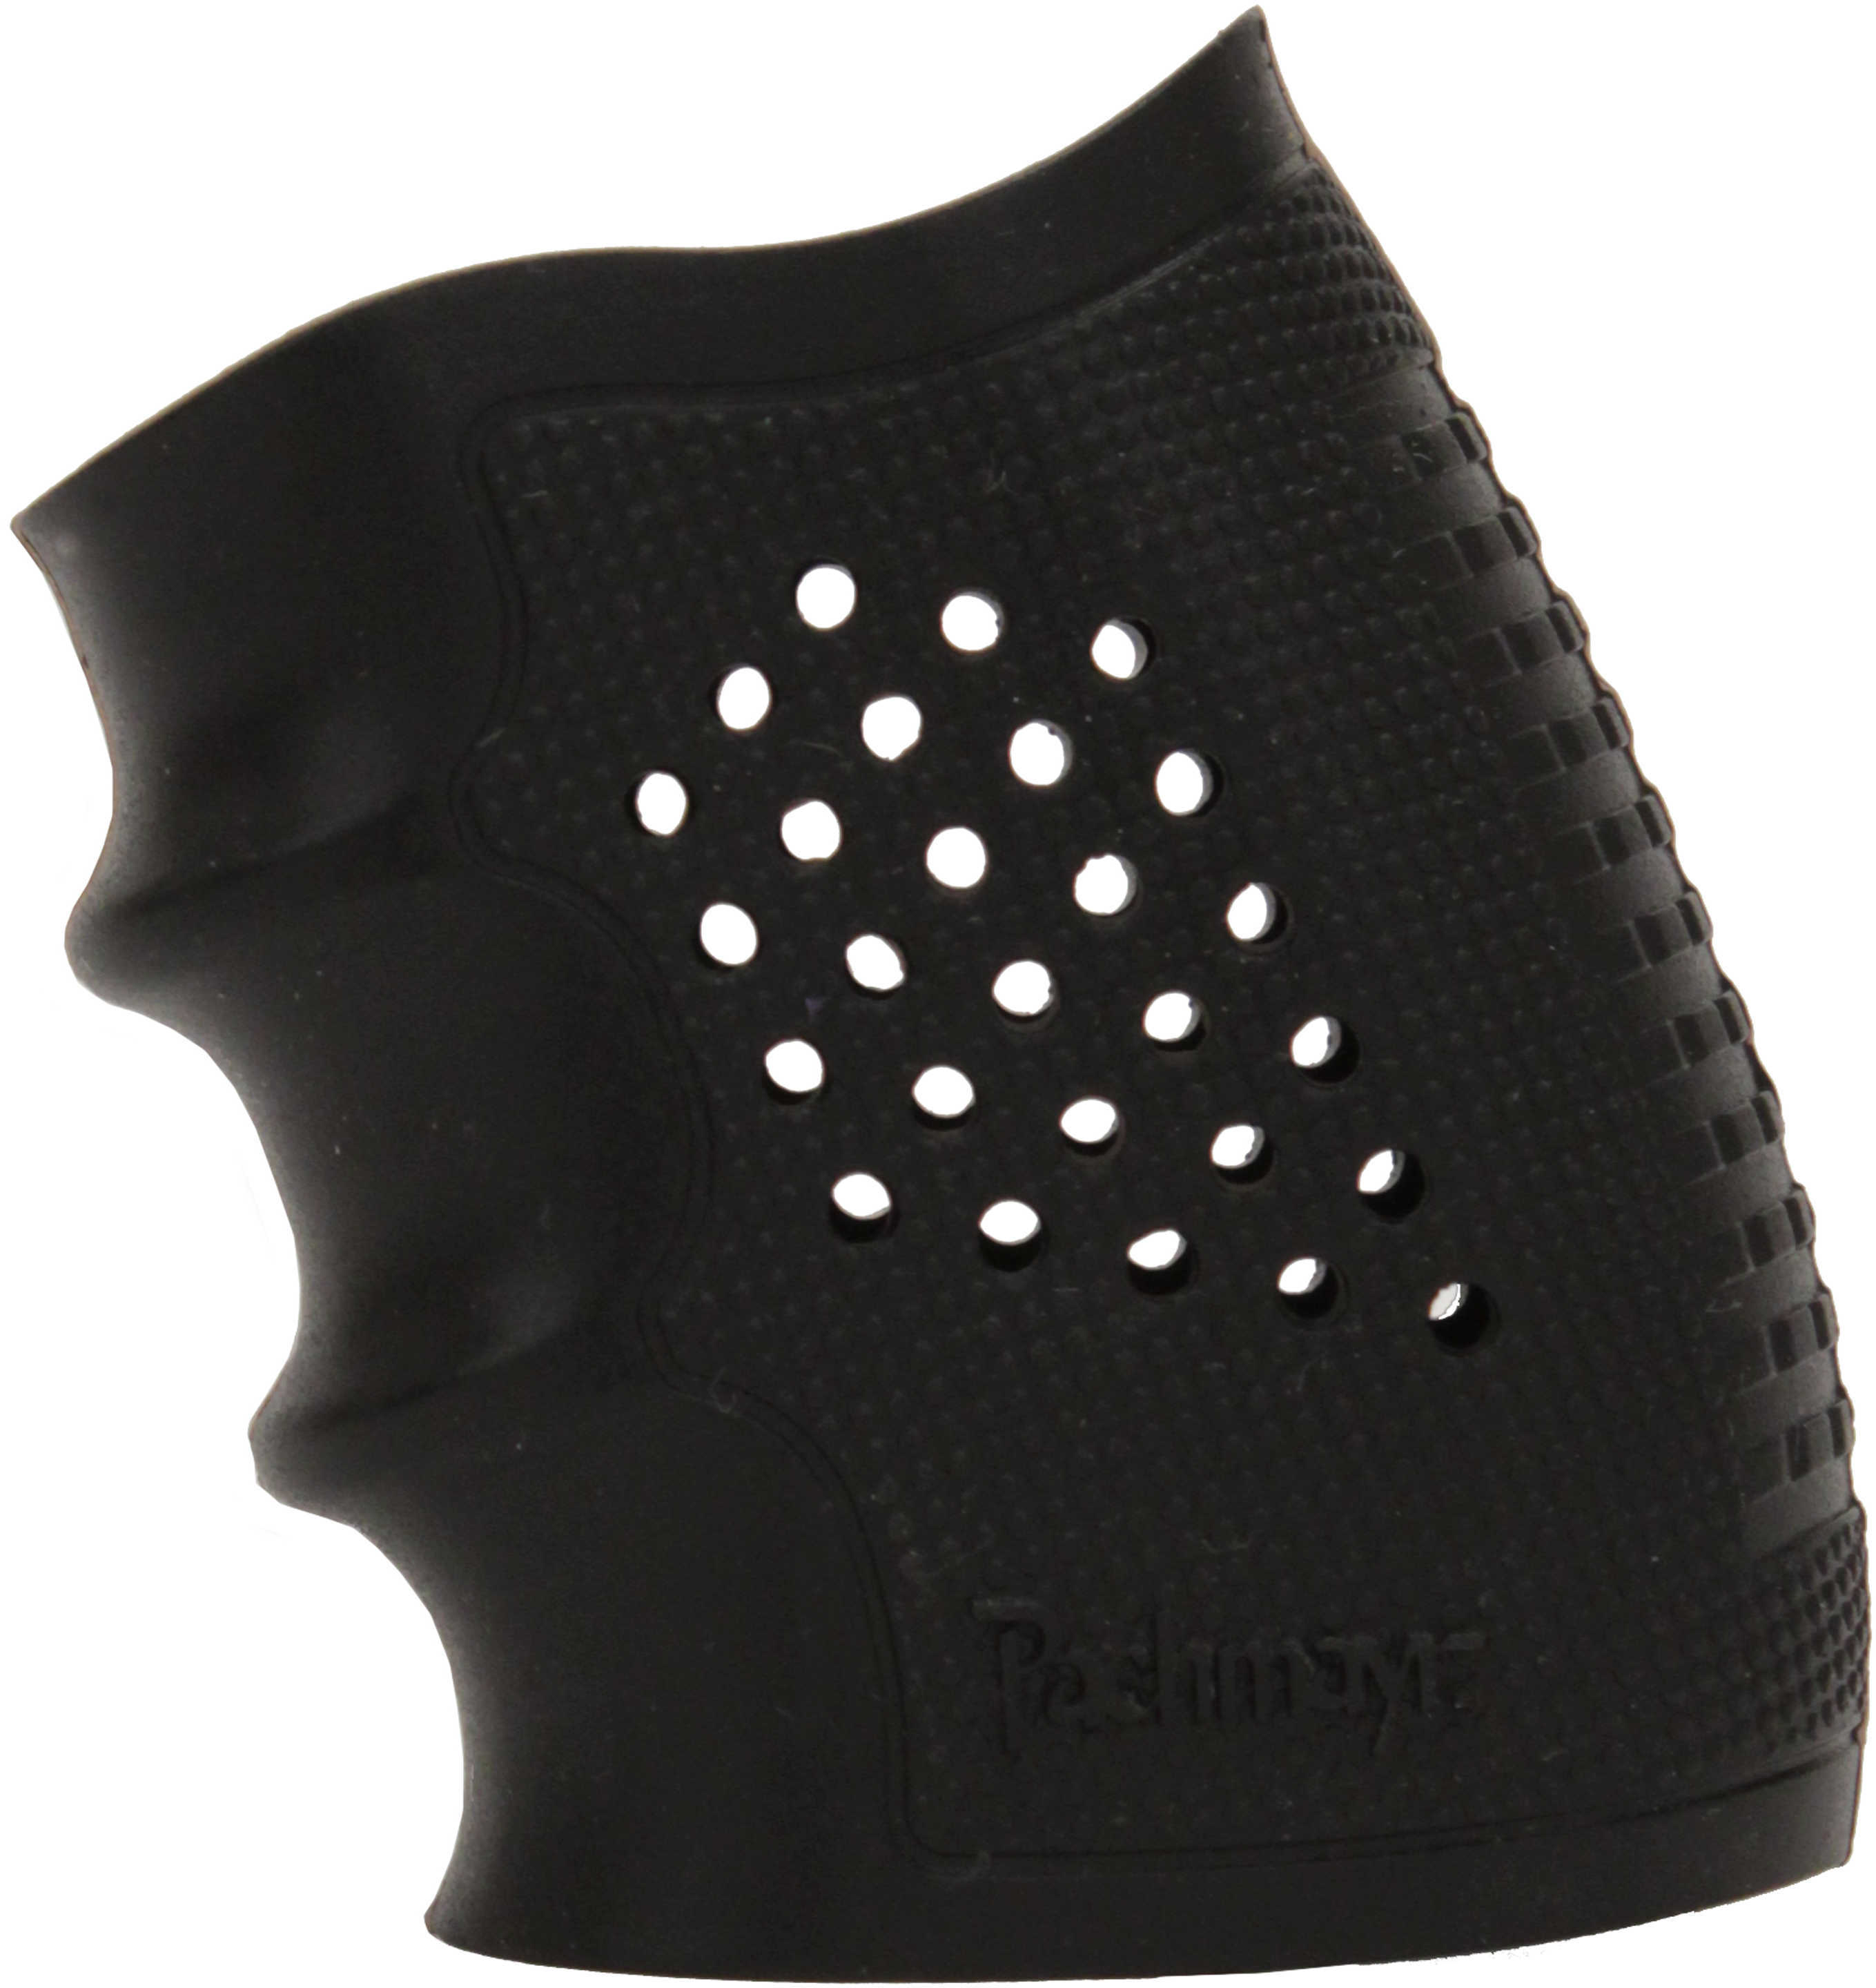 Pachmayr Tactical Grip Glove S&W M&P Series - Custom Shaped - Stretch-To-Fit - Decelerator Material delivers proven reco